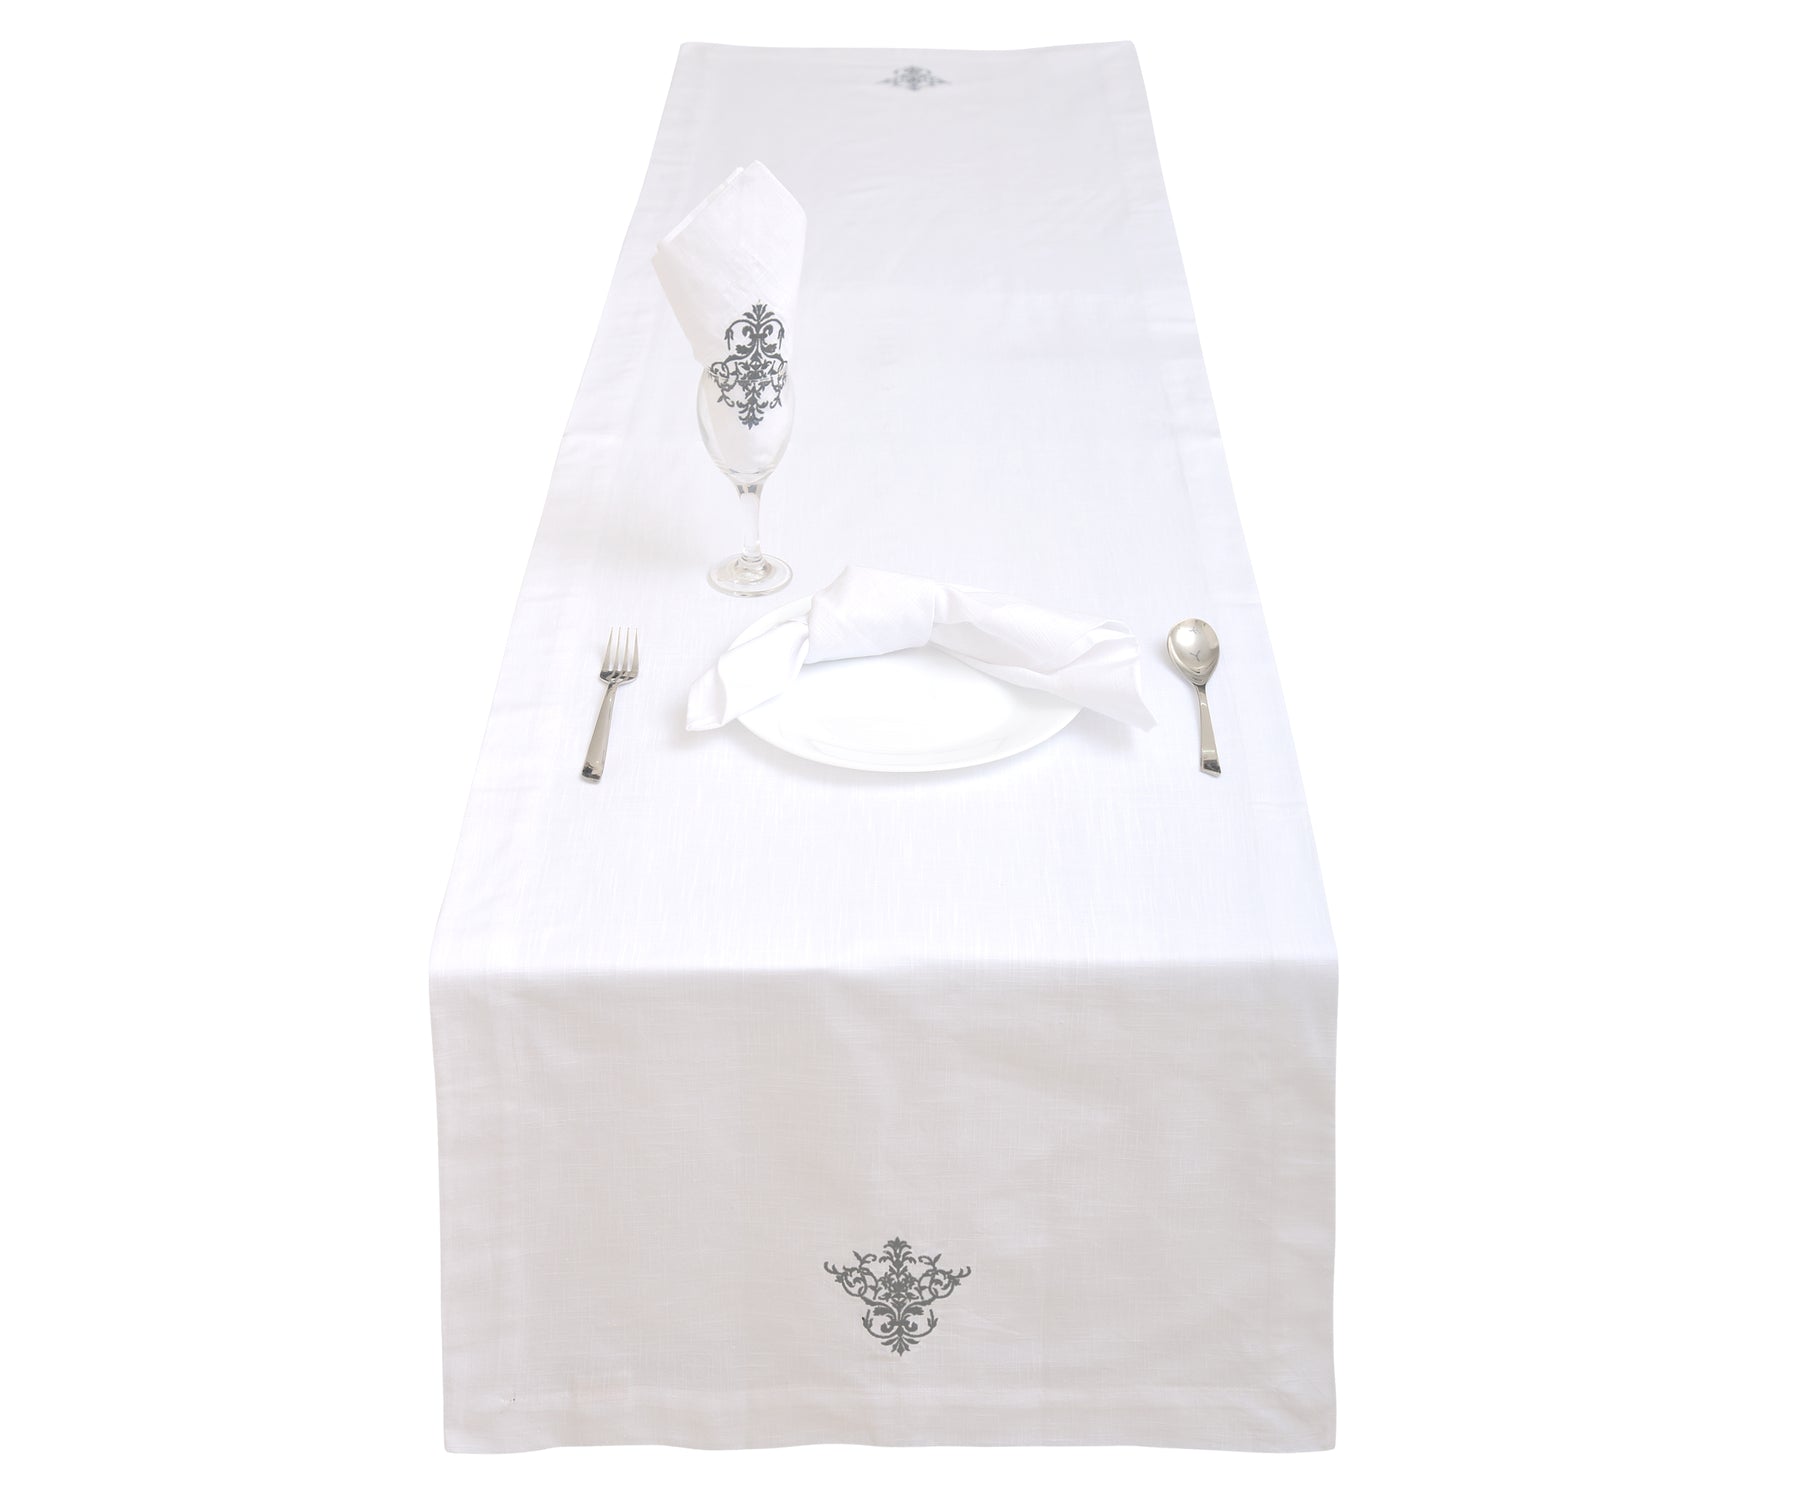 white cotton table runner are perfect for wedding table runners. tablerunners.